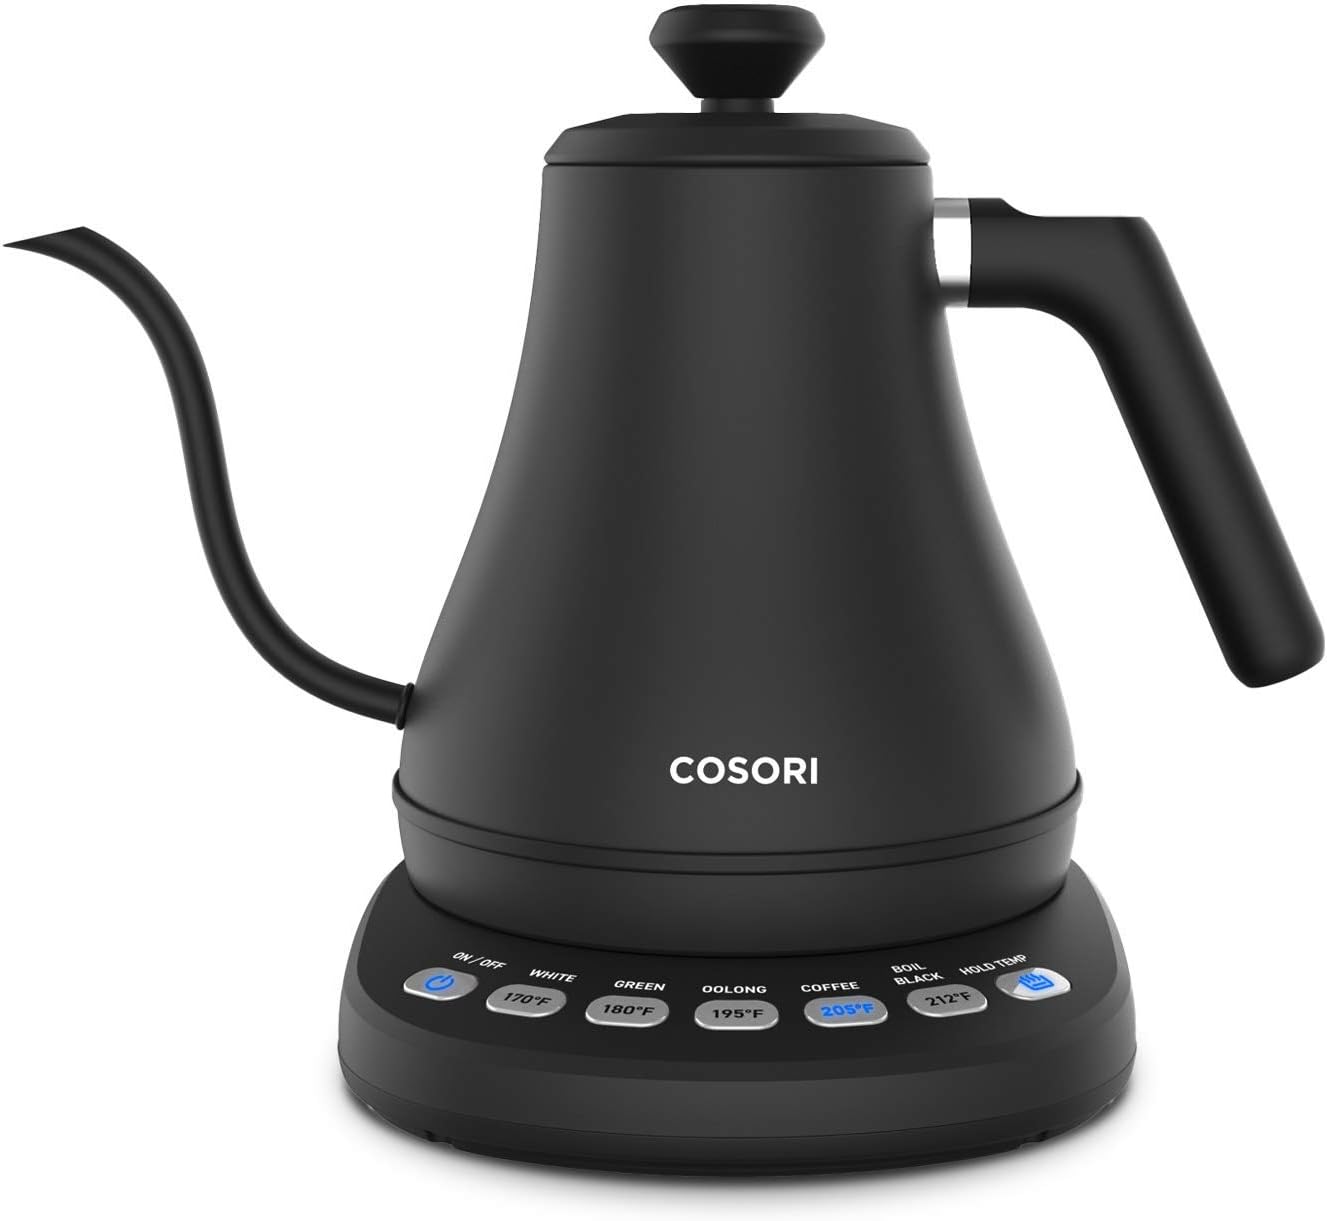 COSORI Electric Gooseneck Kettle with 5 Temperature Control Presets, Pour Over Kettle for Coffee & Tea, Hot Water Boiler, 100% Stainless Steel Inner Lid & Bottom, 1200W/0.8L